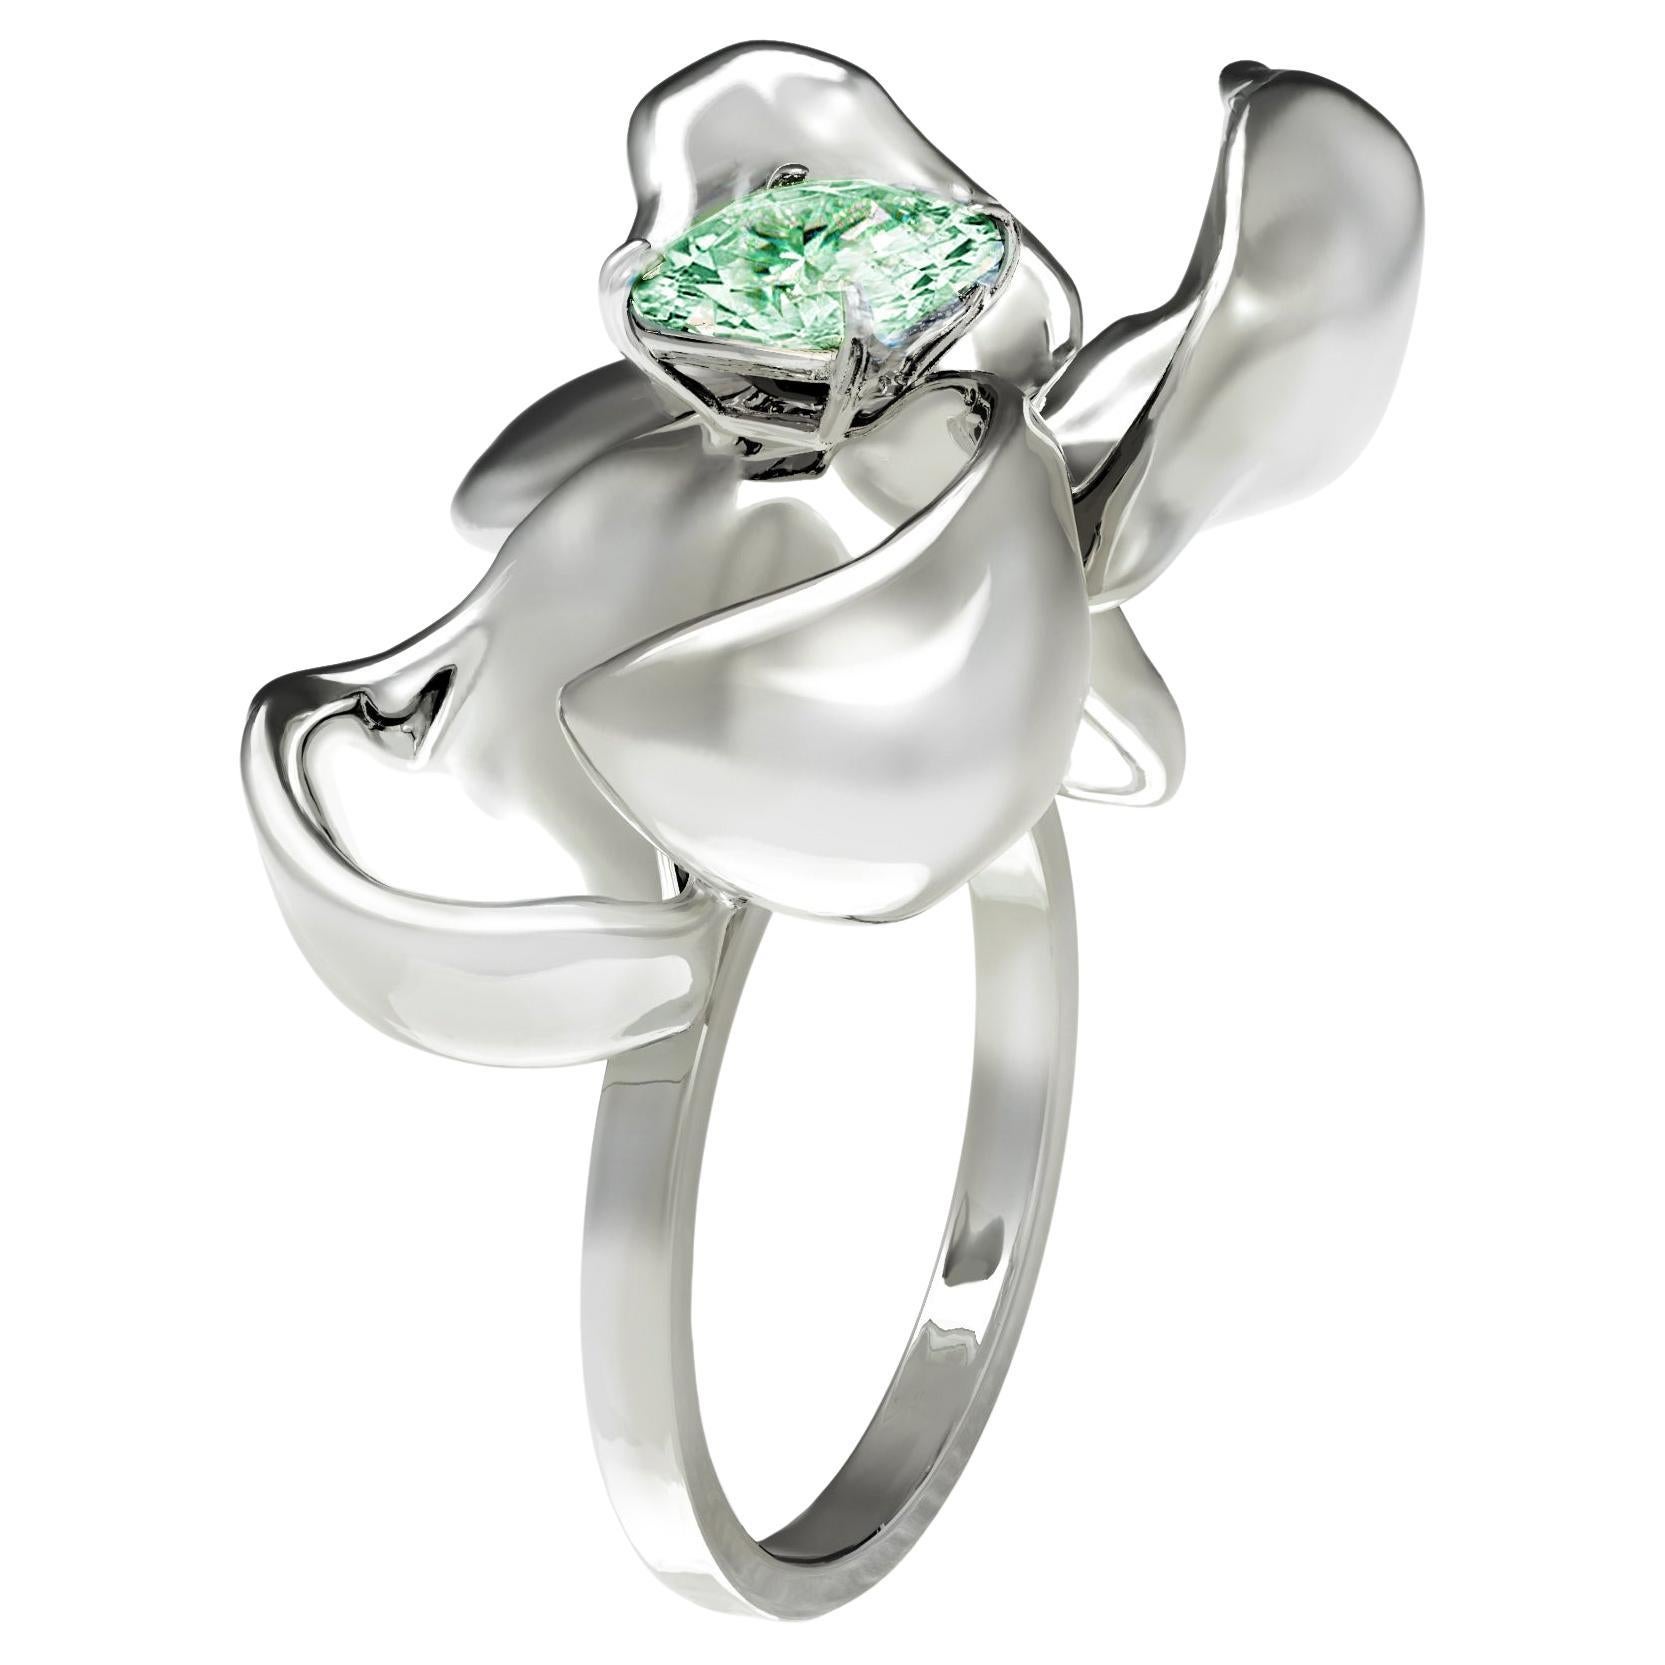 14 Karat White Gold Contemporary Ring with Light Green Sapphire